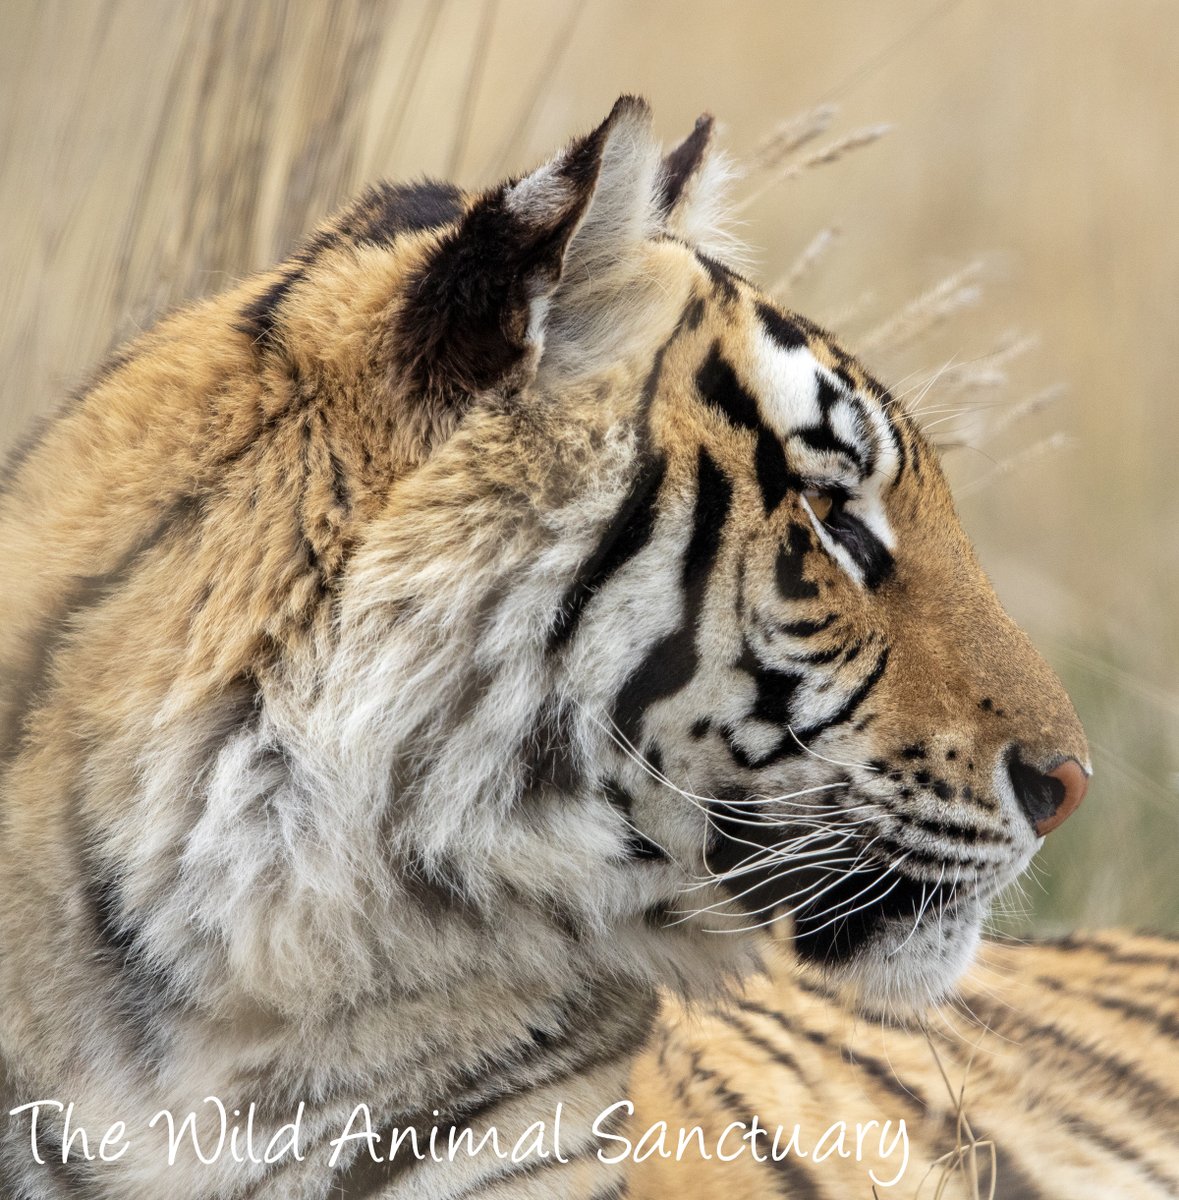 Picture Of The Day!

Saving one animal may not change the world But surely for that one animal The world will change Forever!

wildanimalsanctuary.org

#TheWildAnimalSanctuary #wildanimalsanctuary #sanctuary #Colorado #rescueanimals #sanctuary #Colorado